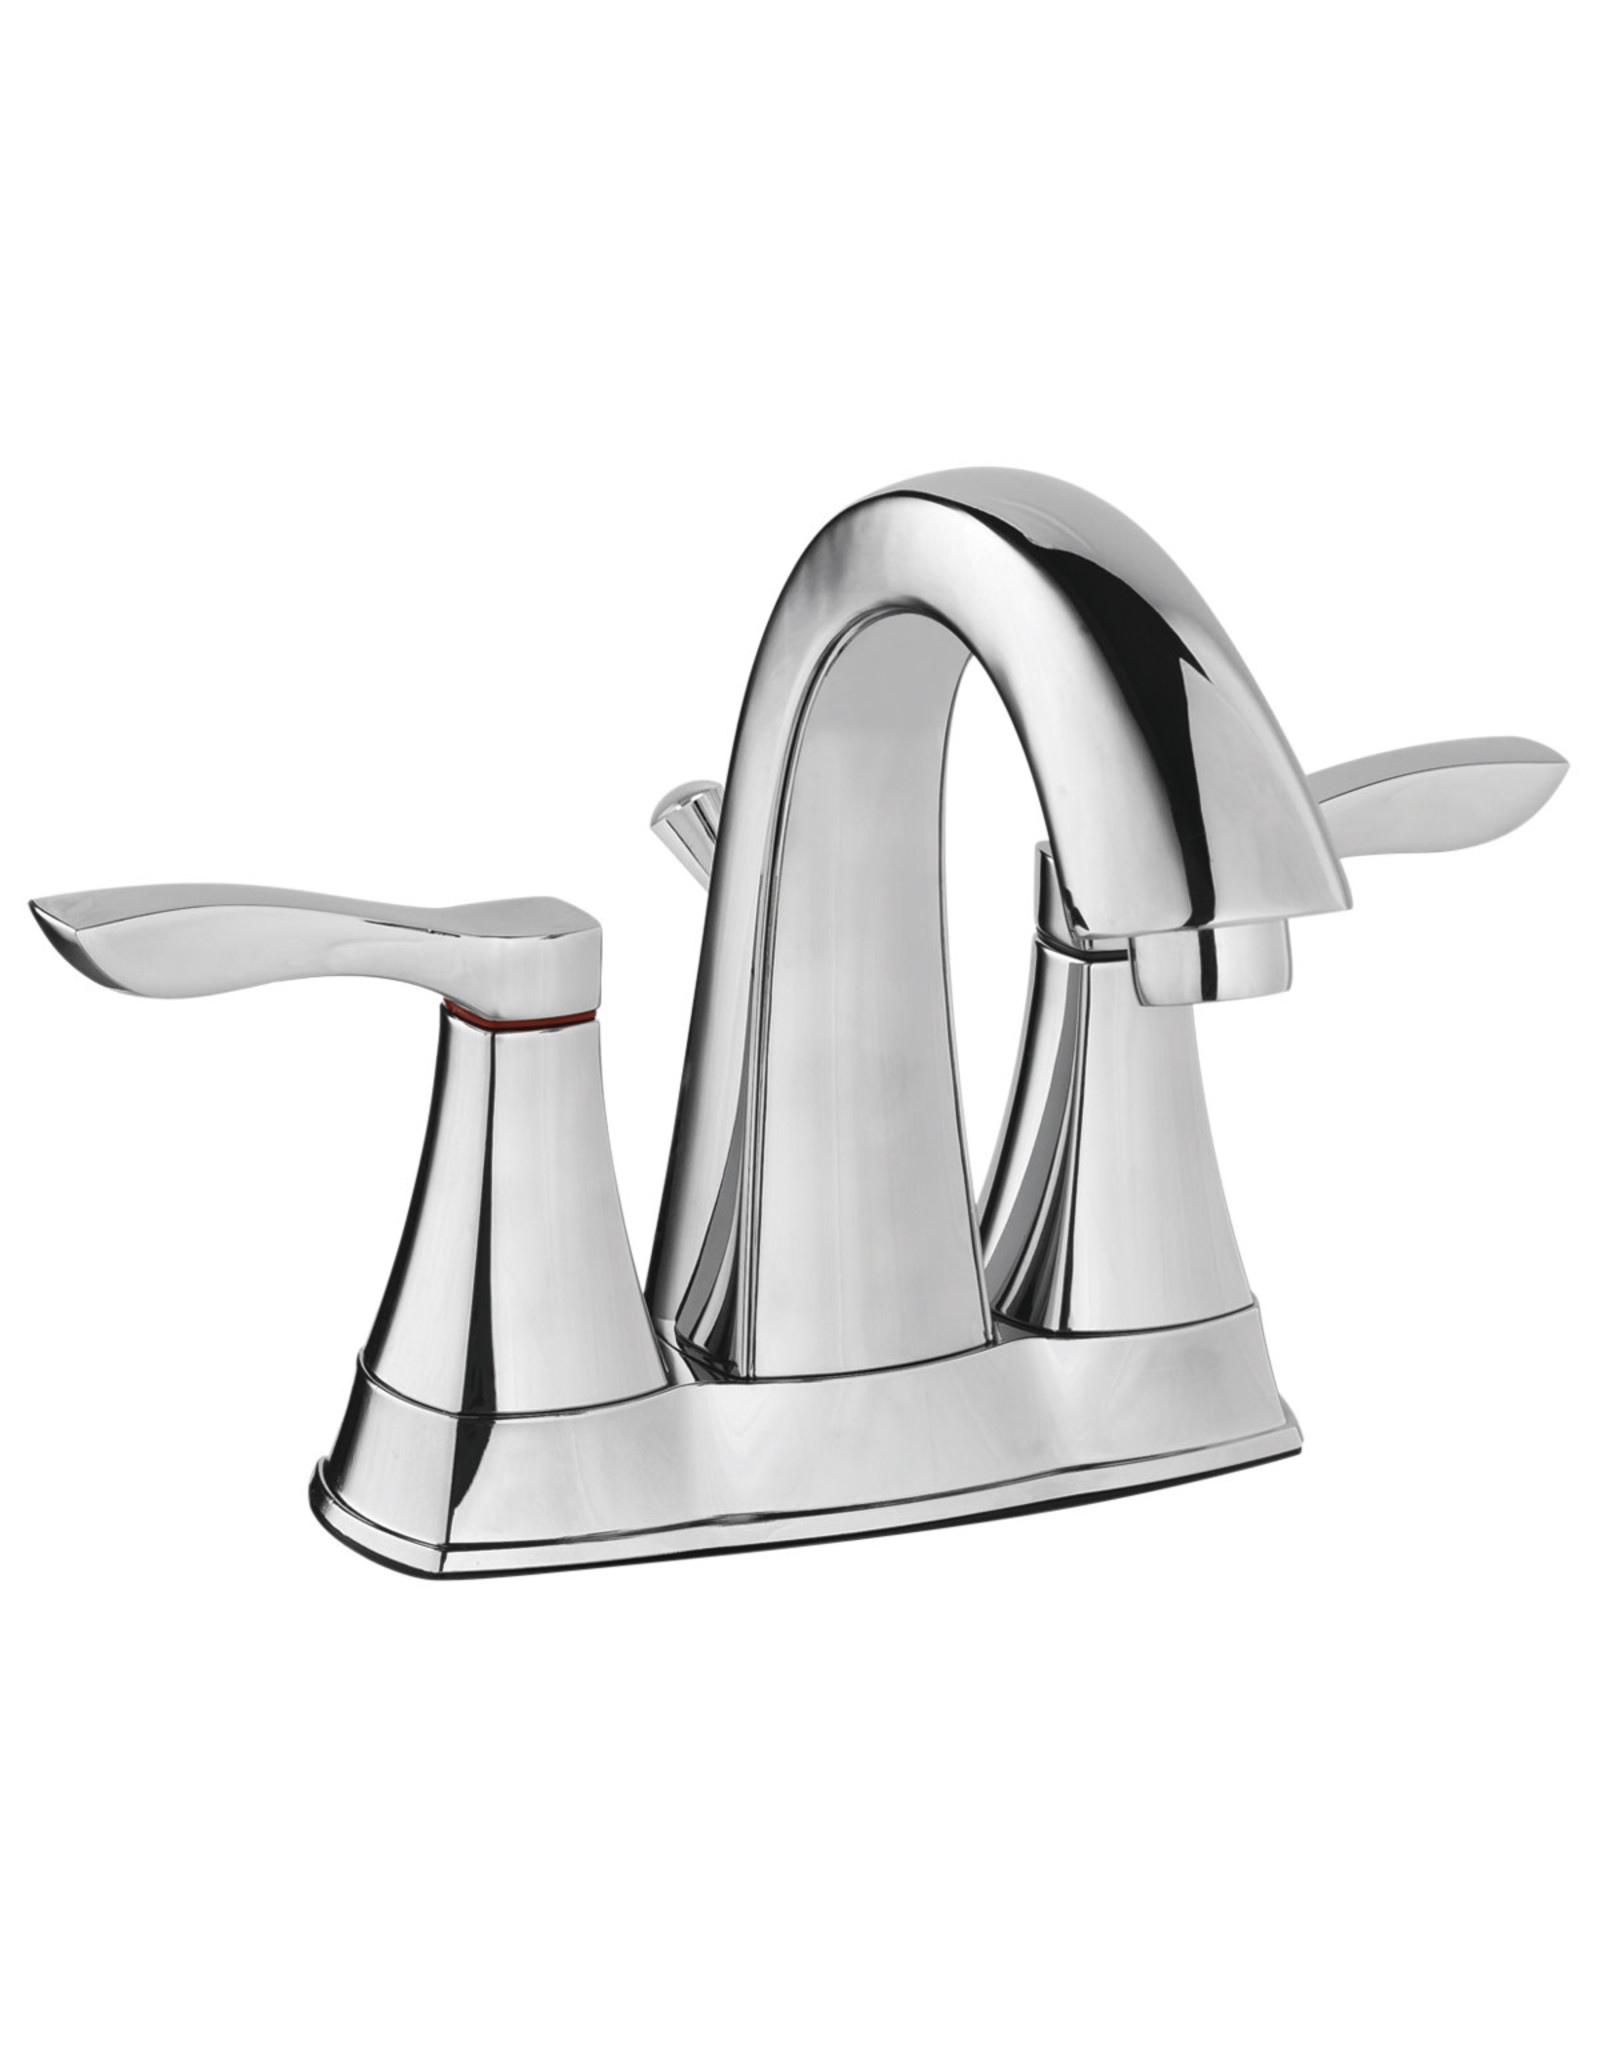 2 Handle High Rise Lavatory Faucet 1.5 GPM with Pop-Up – Chrome